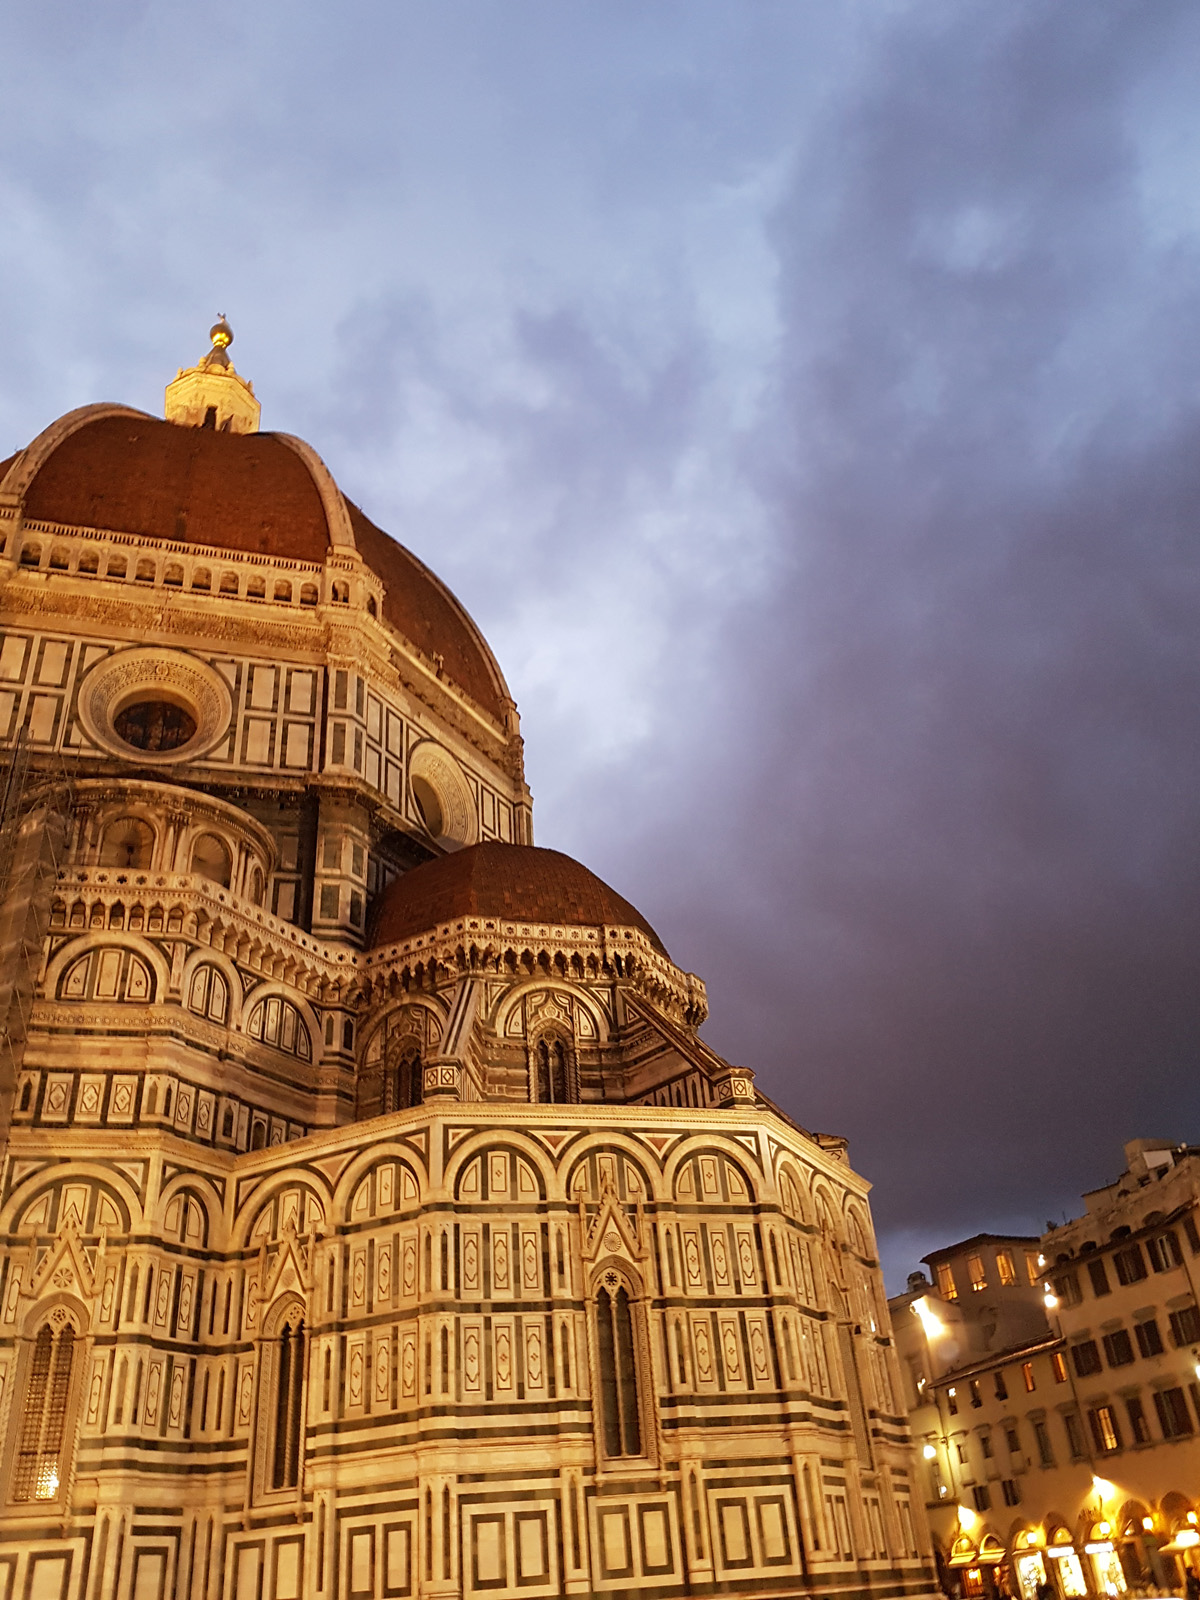 The Duomo (Florence Cathedral | Cattedrale di Santa Maria del Fiore) and Baptistery of Saint John (Florence Baptistery)